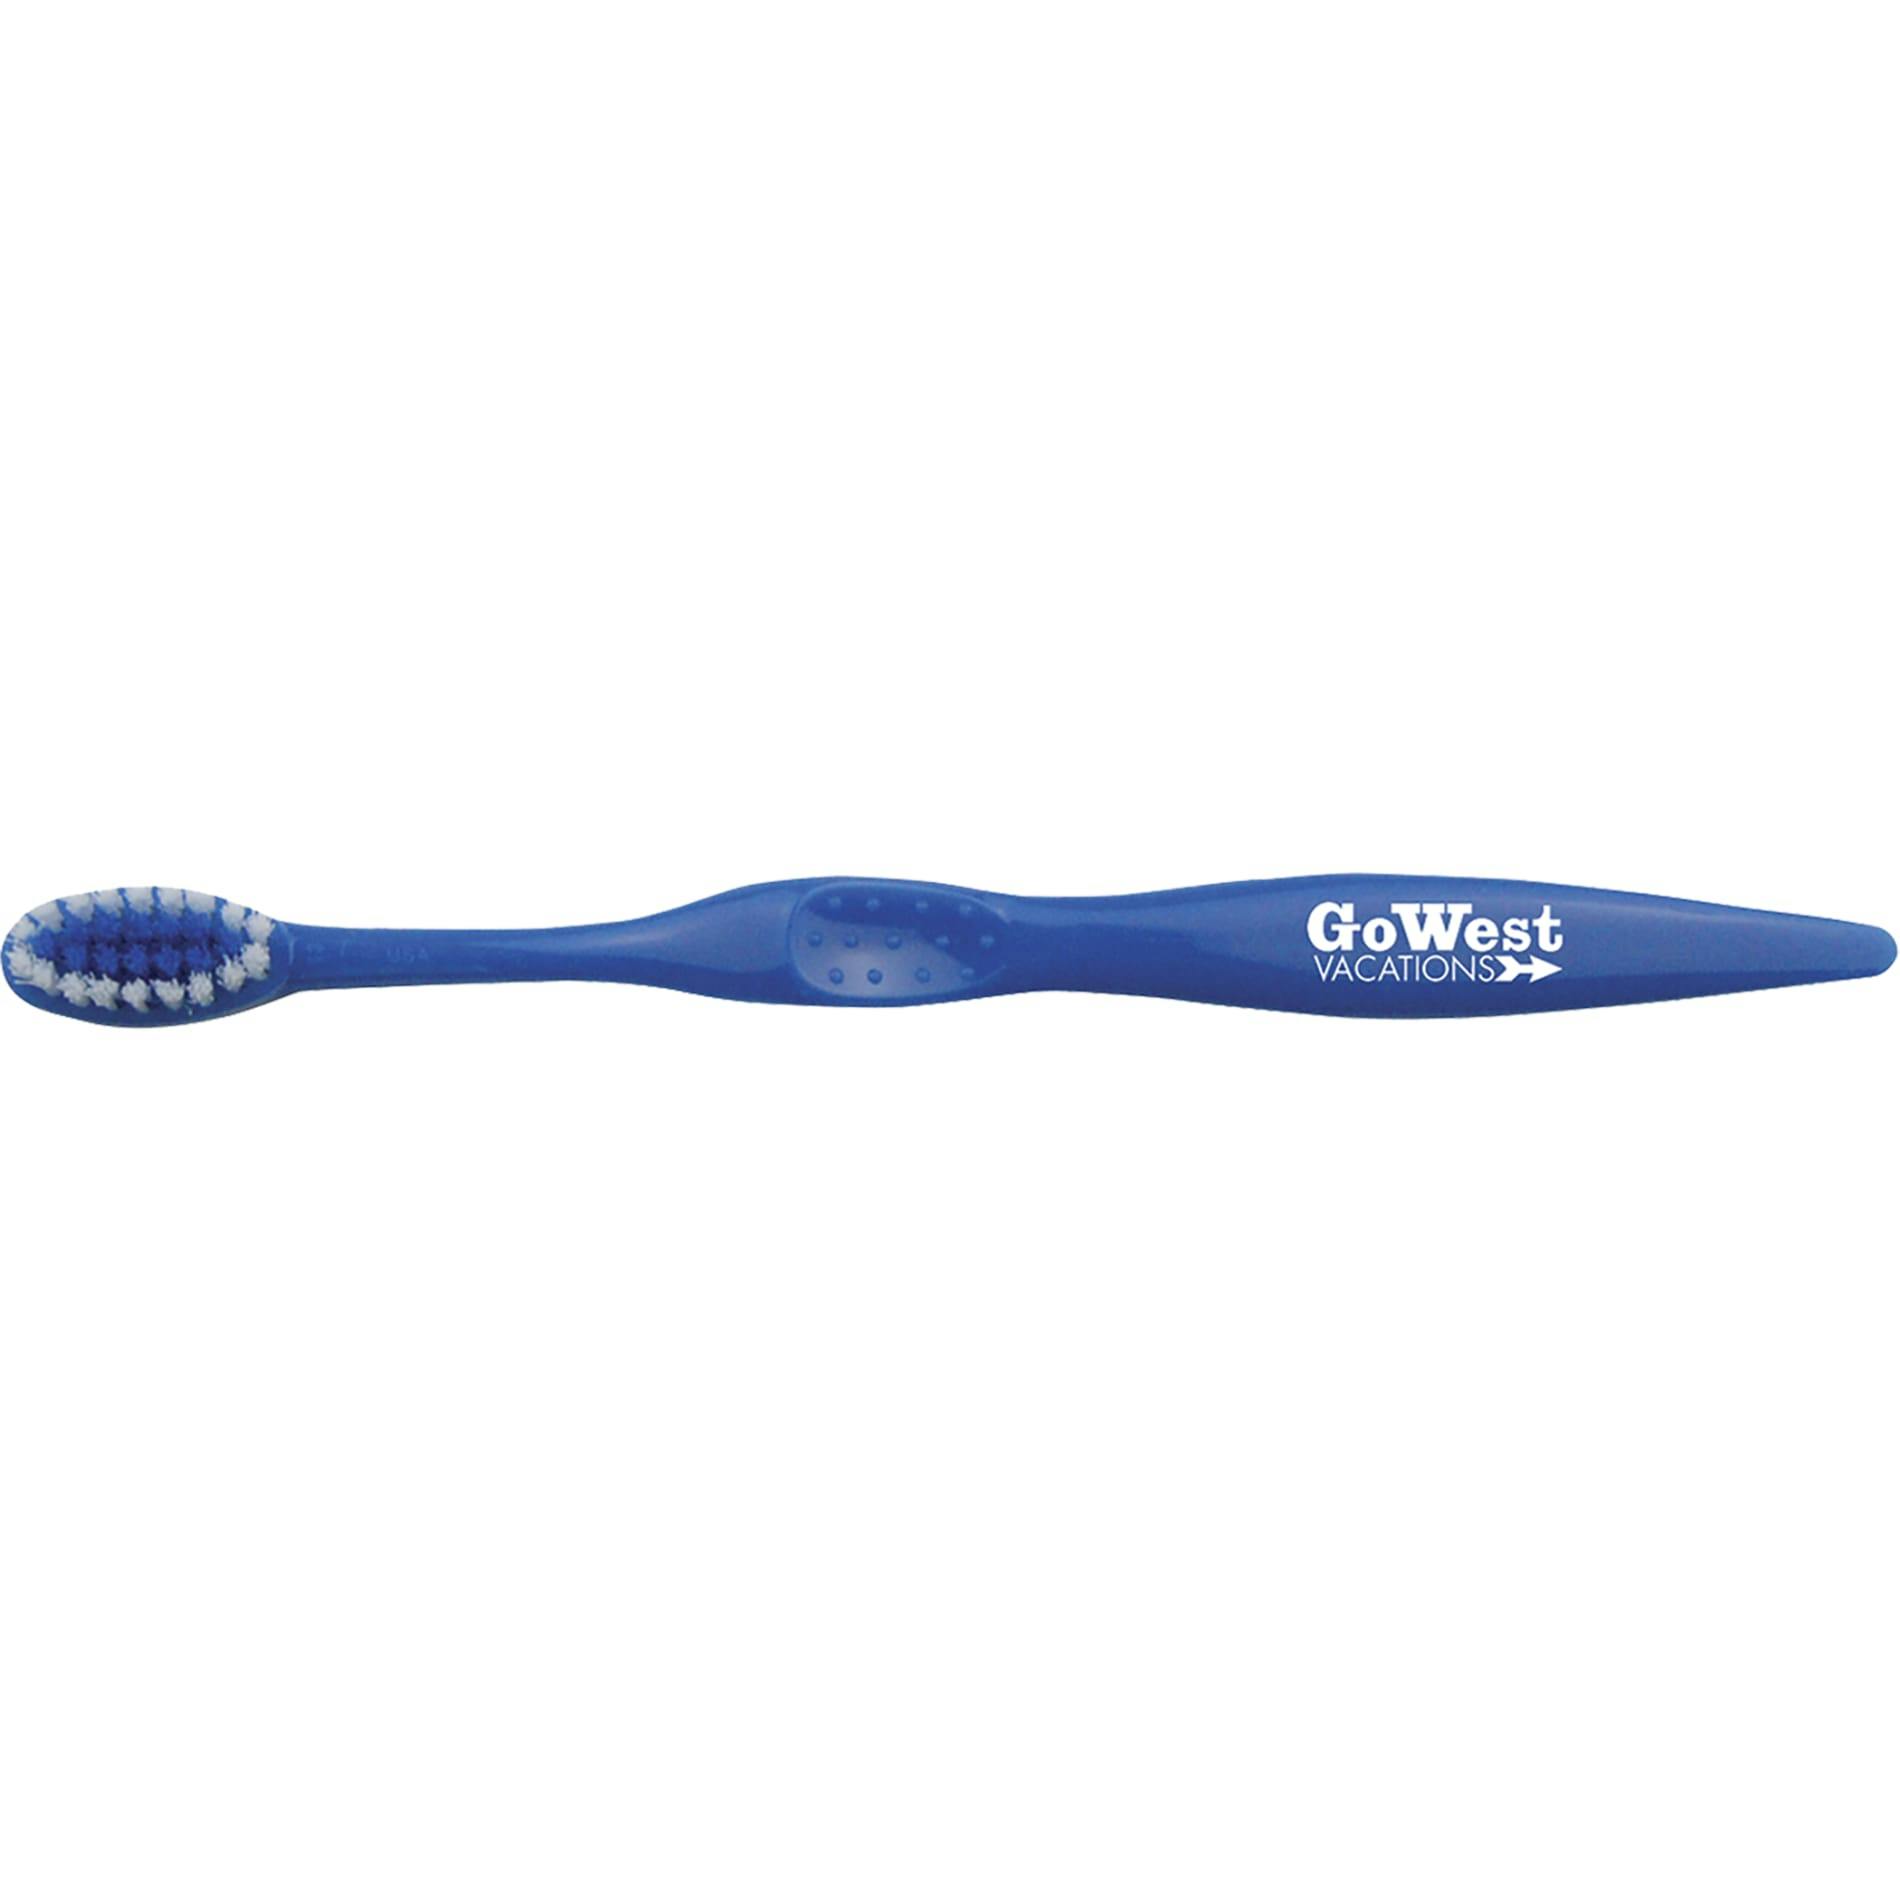 Concept Junior Toothbrush - additional Image 1